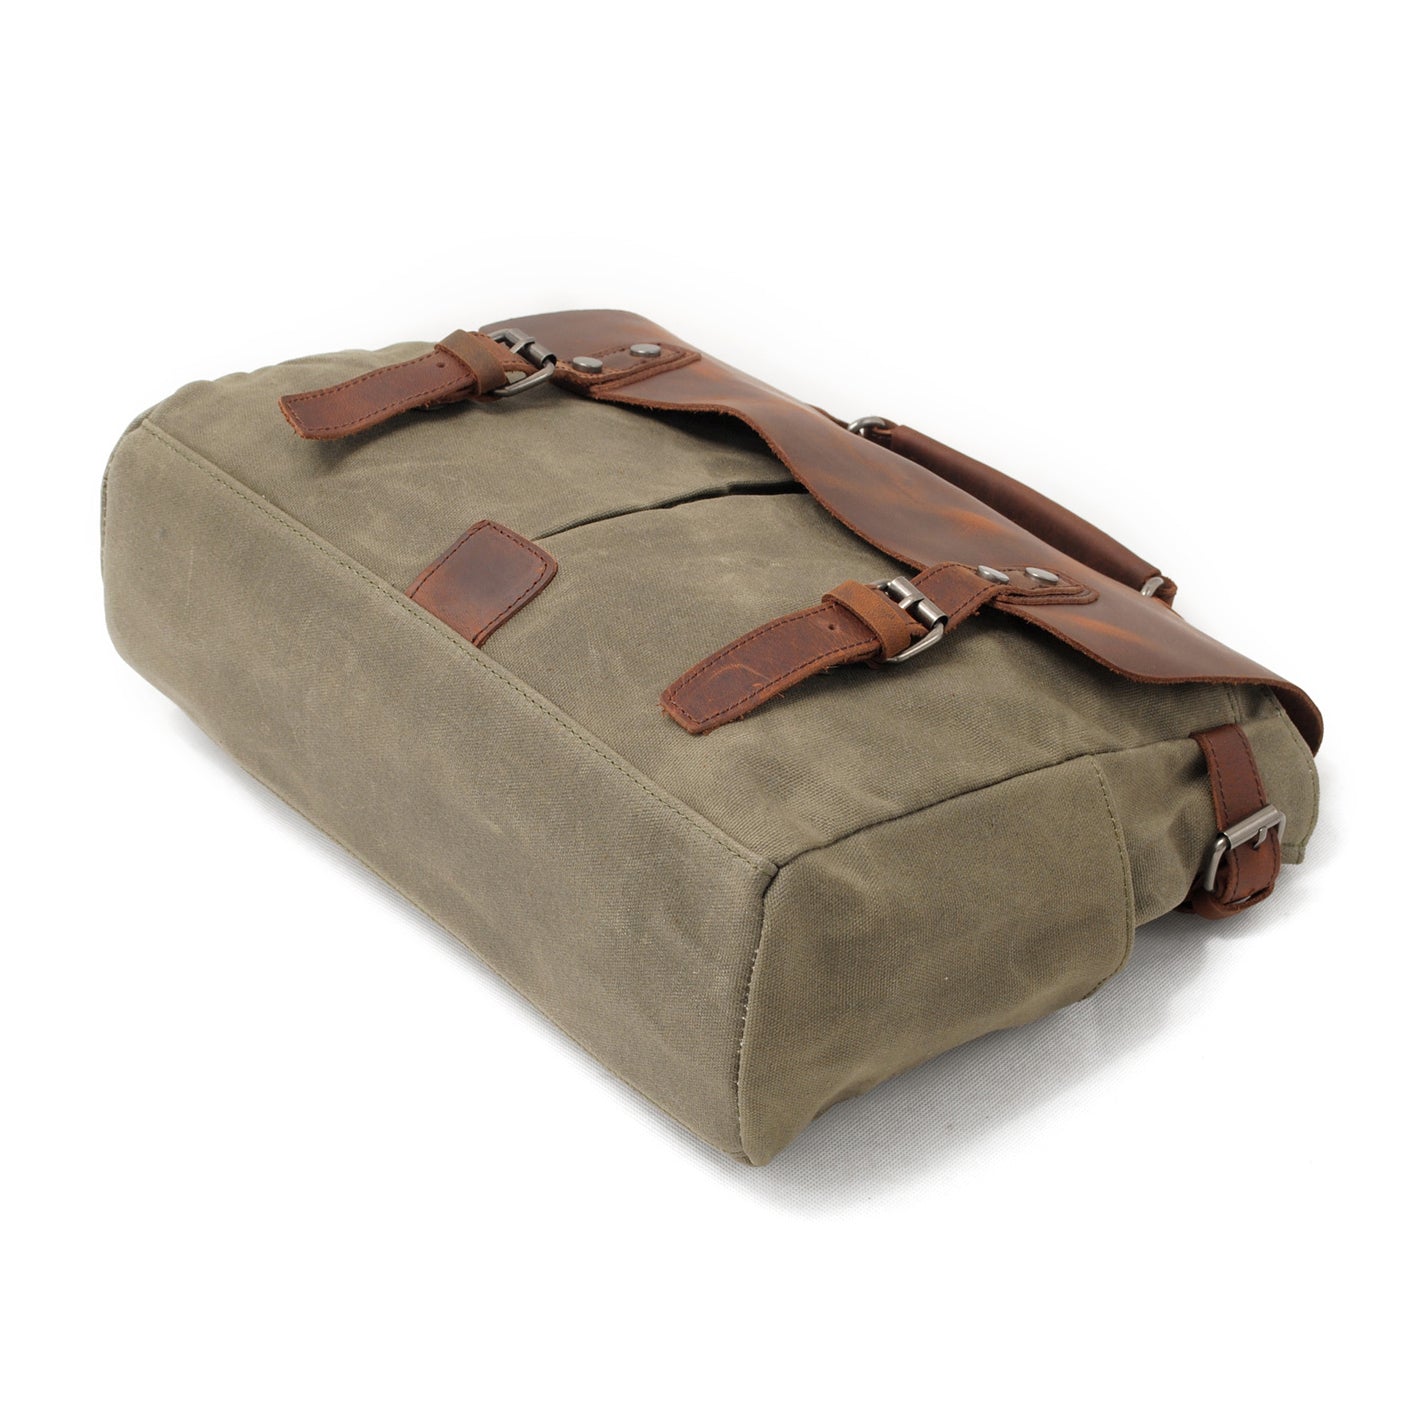 Vintage-Waxed-Canvas-and-Crazy-Horse-Leather-Laptop-Messenger-Bag-Army-Green-i7bags-5